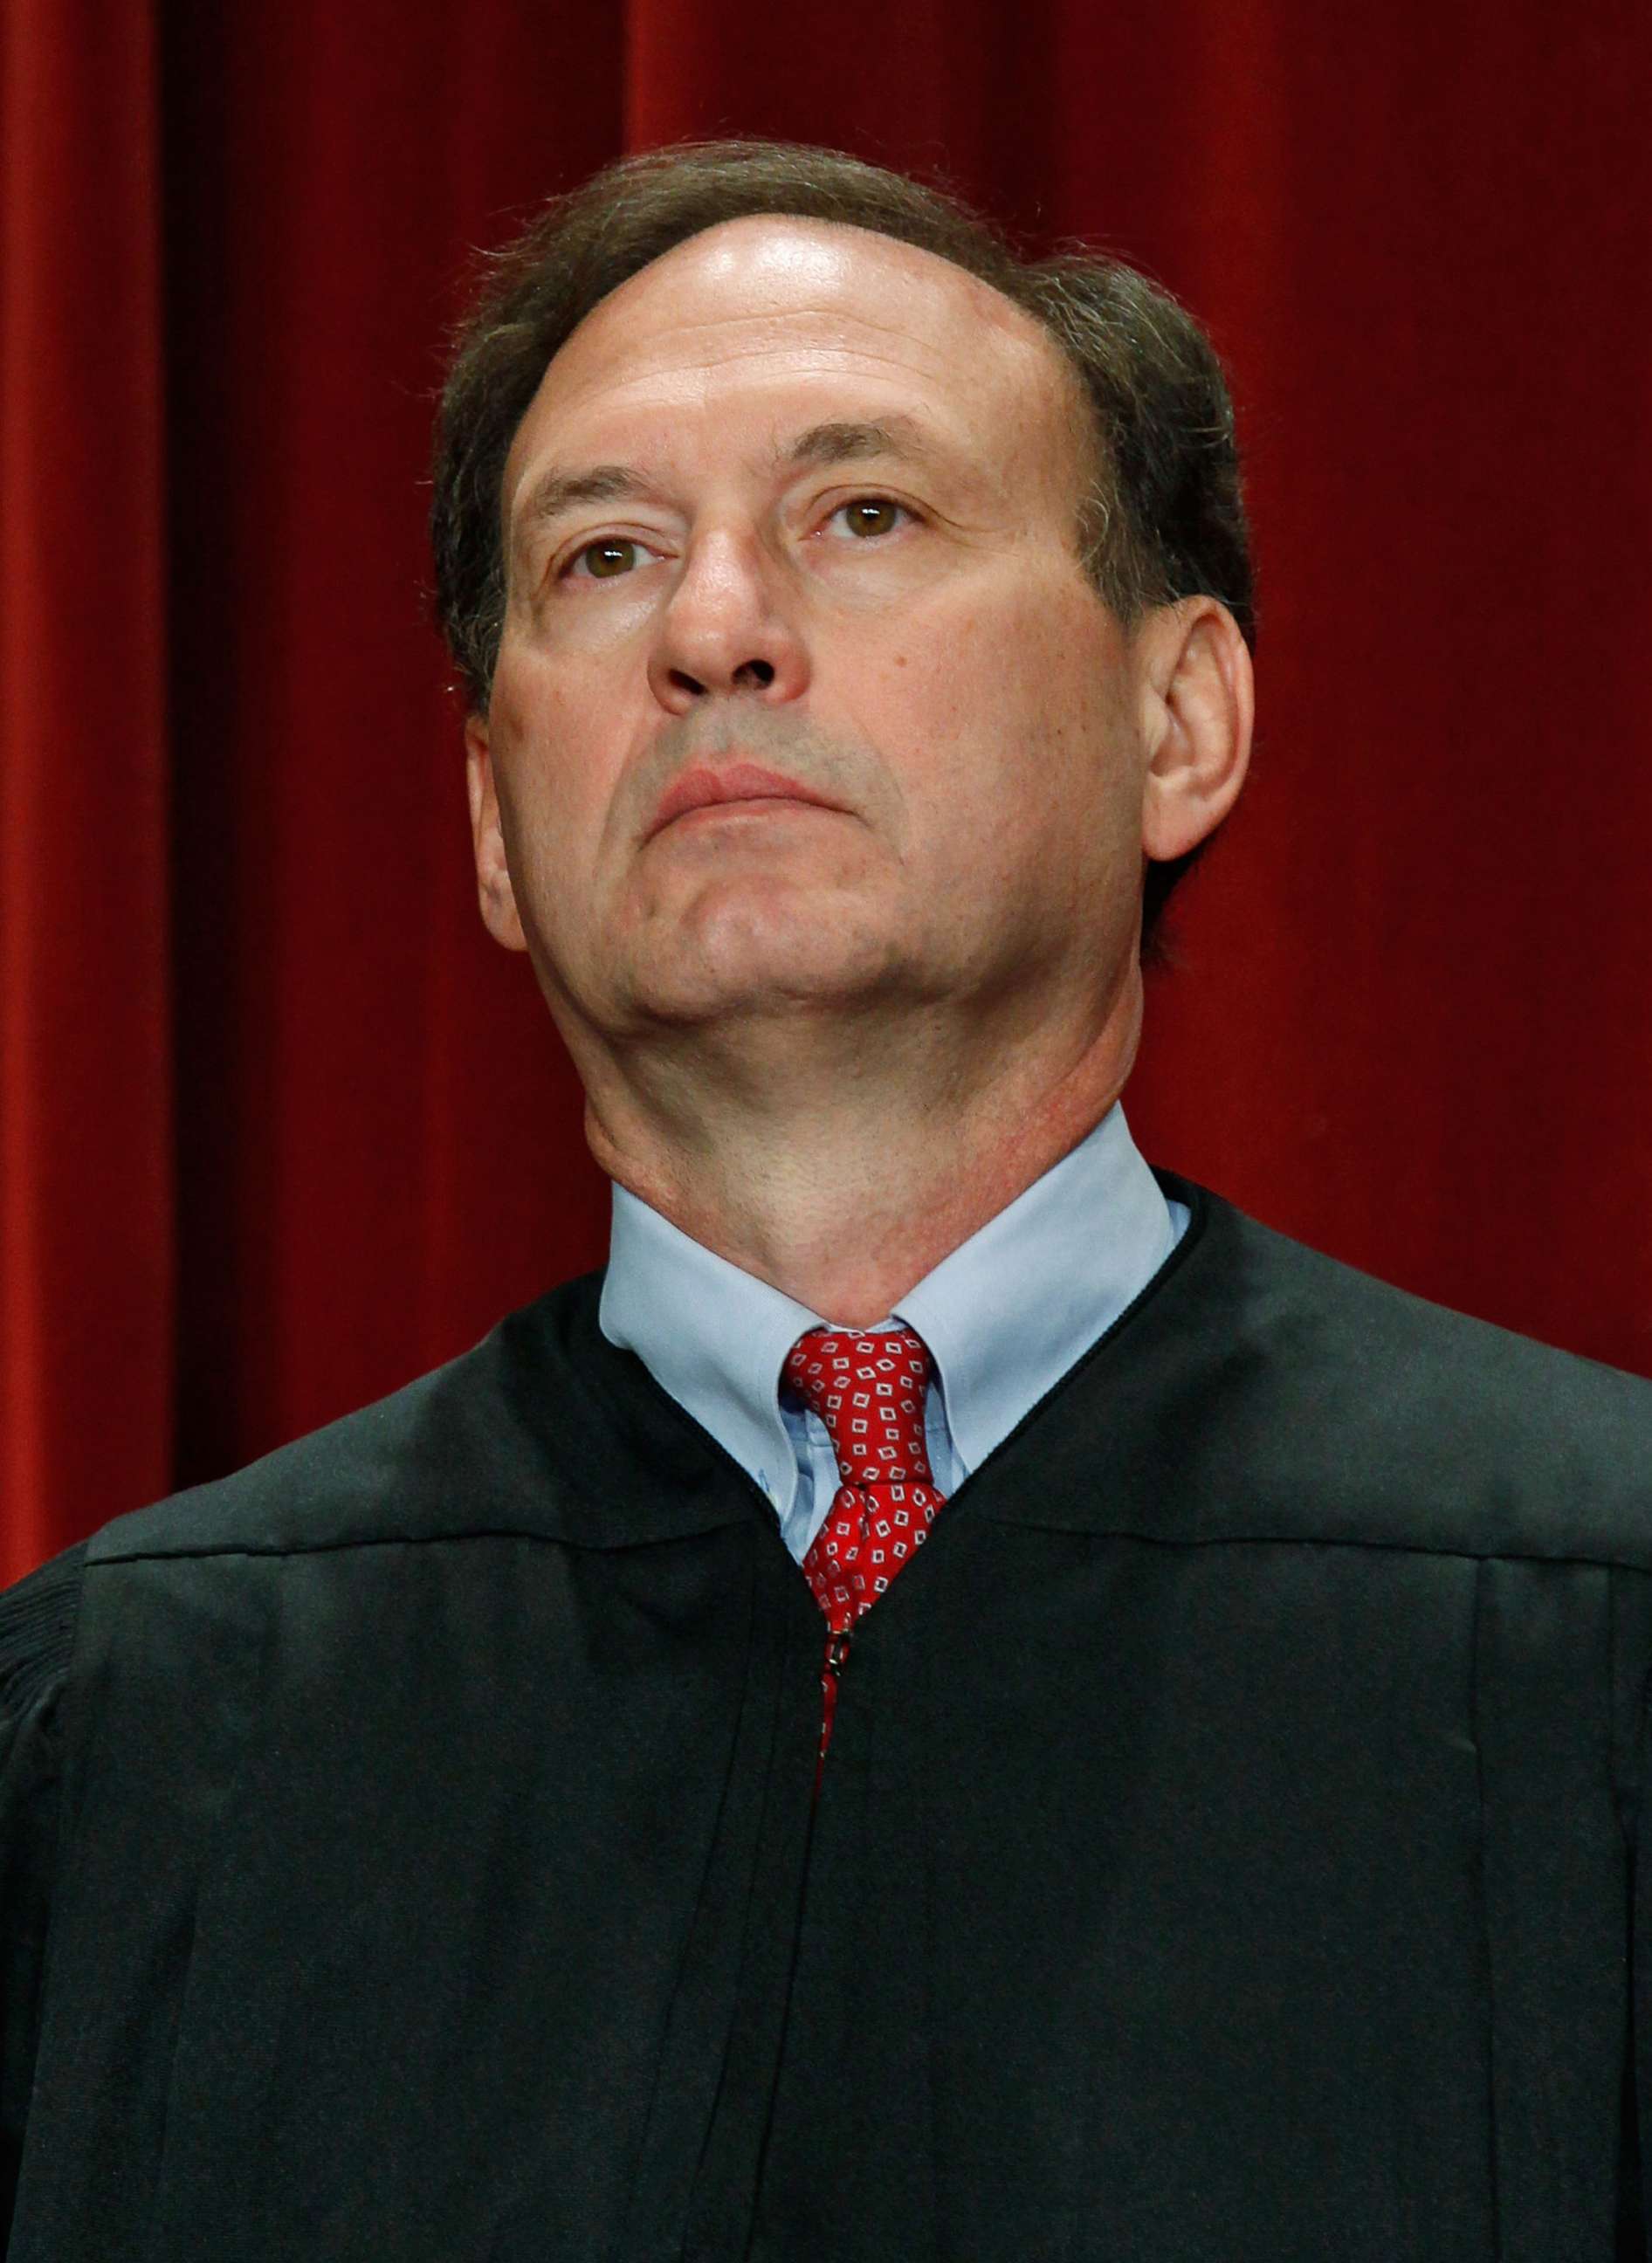 PHOTO: Associate Justice Samuel Alito Jr. poses for a group photograph at the U.S. Supreme Court building on Sept. 29, 2009 in Washington.